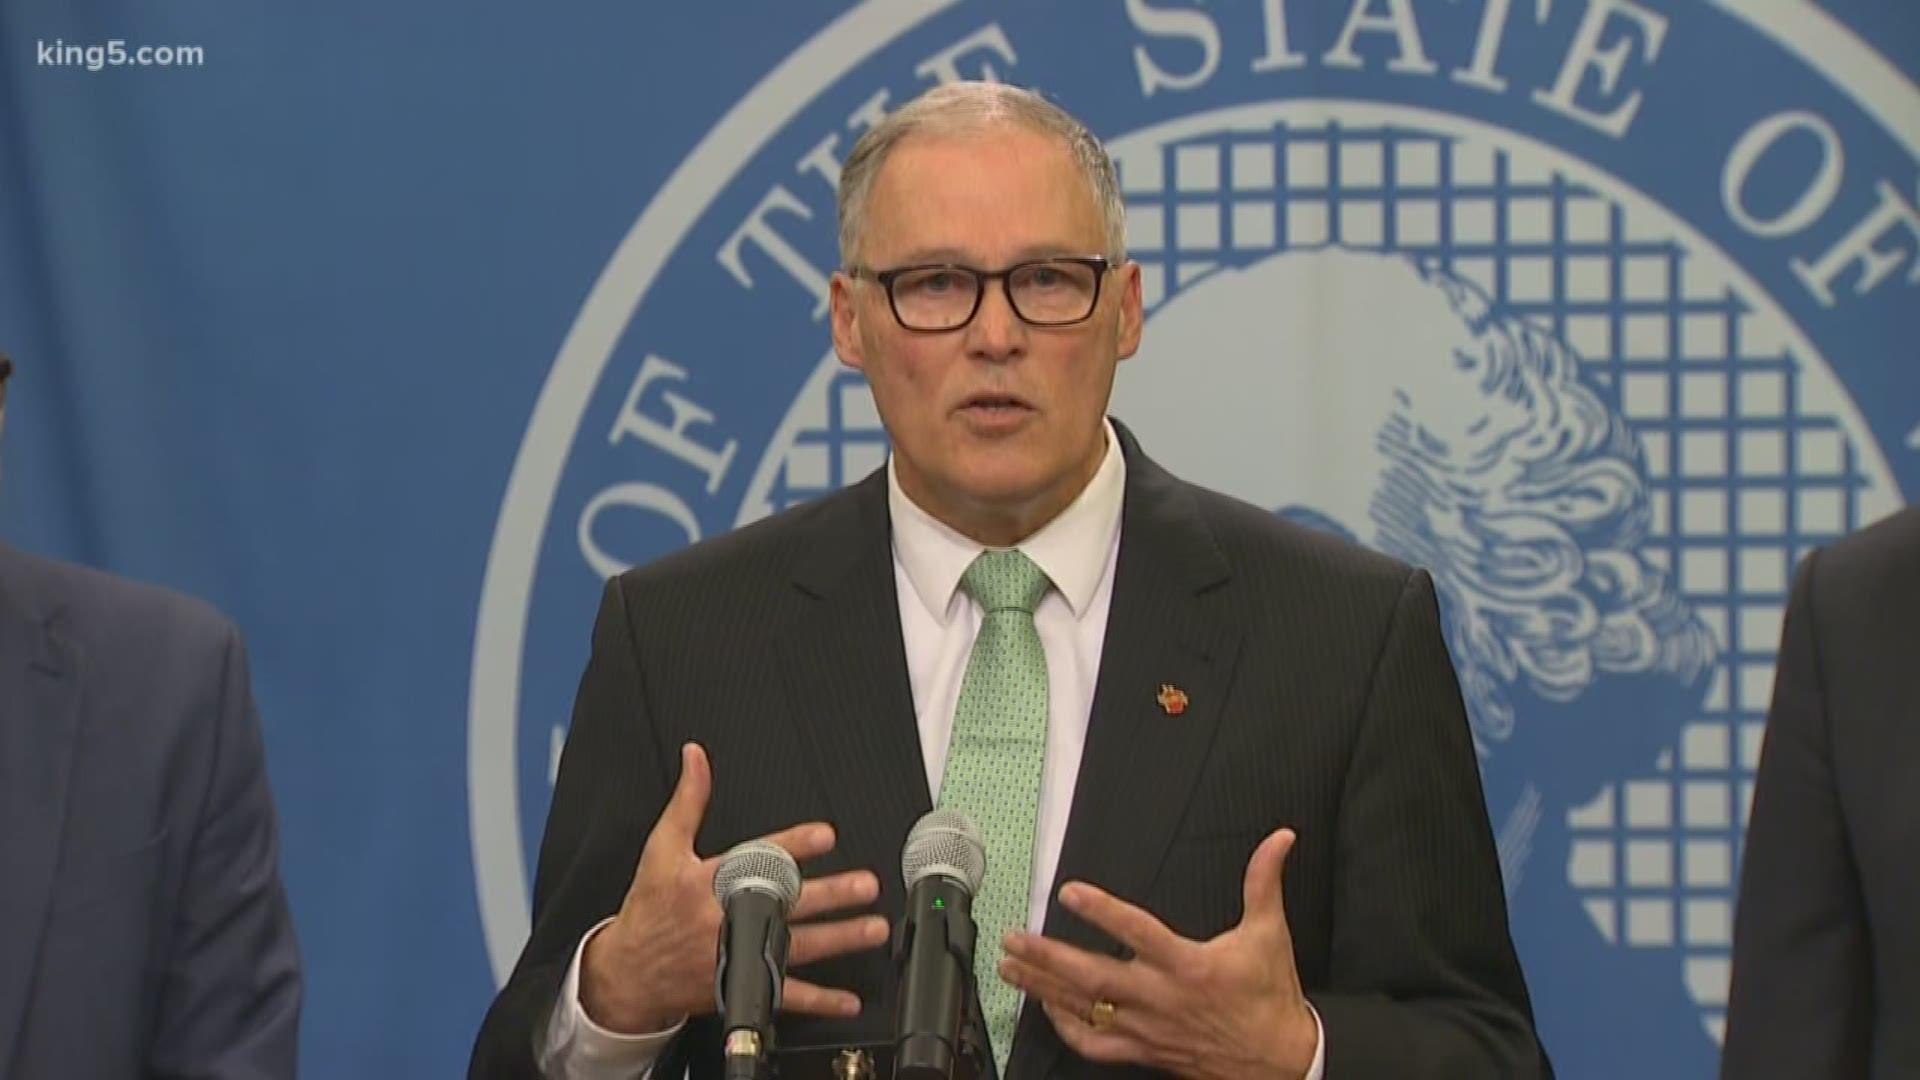 Governor Jay Inslee says the state is doing everything it can to control the spread of the virus.